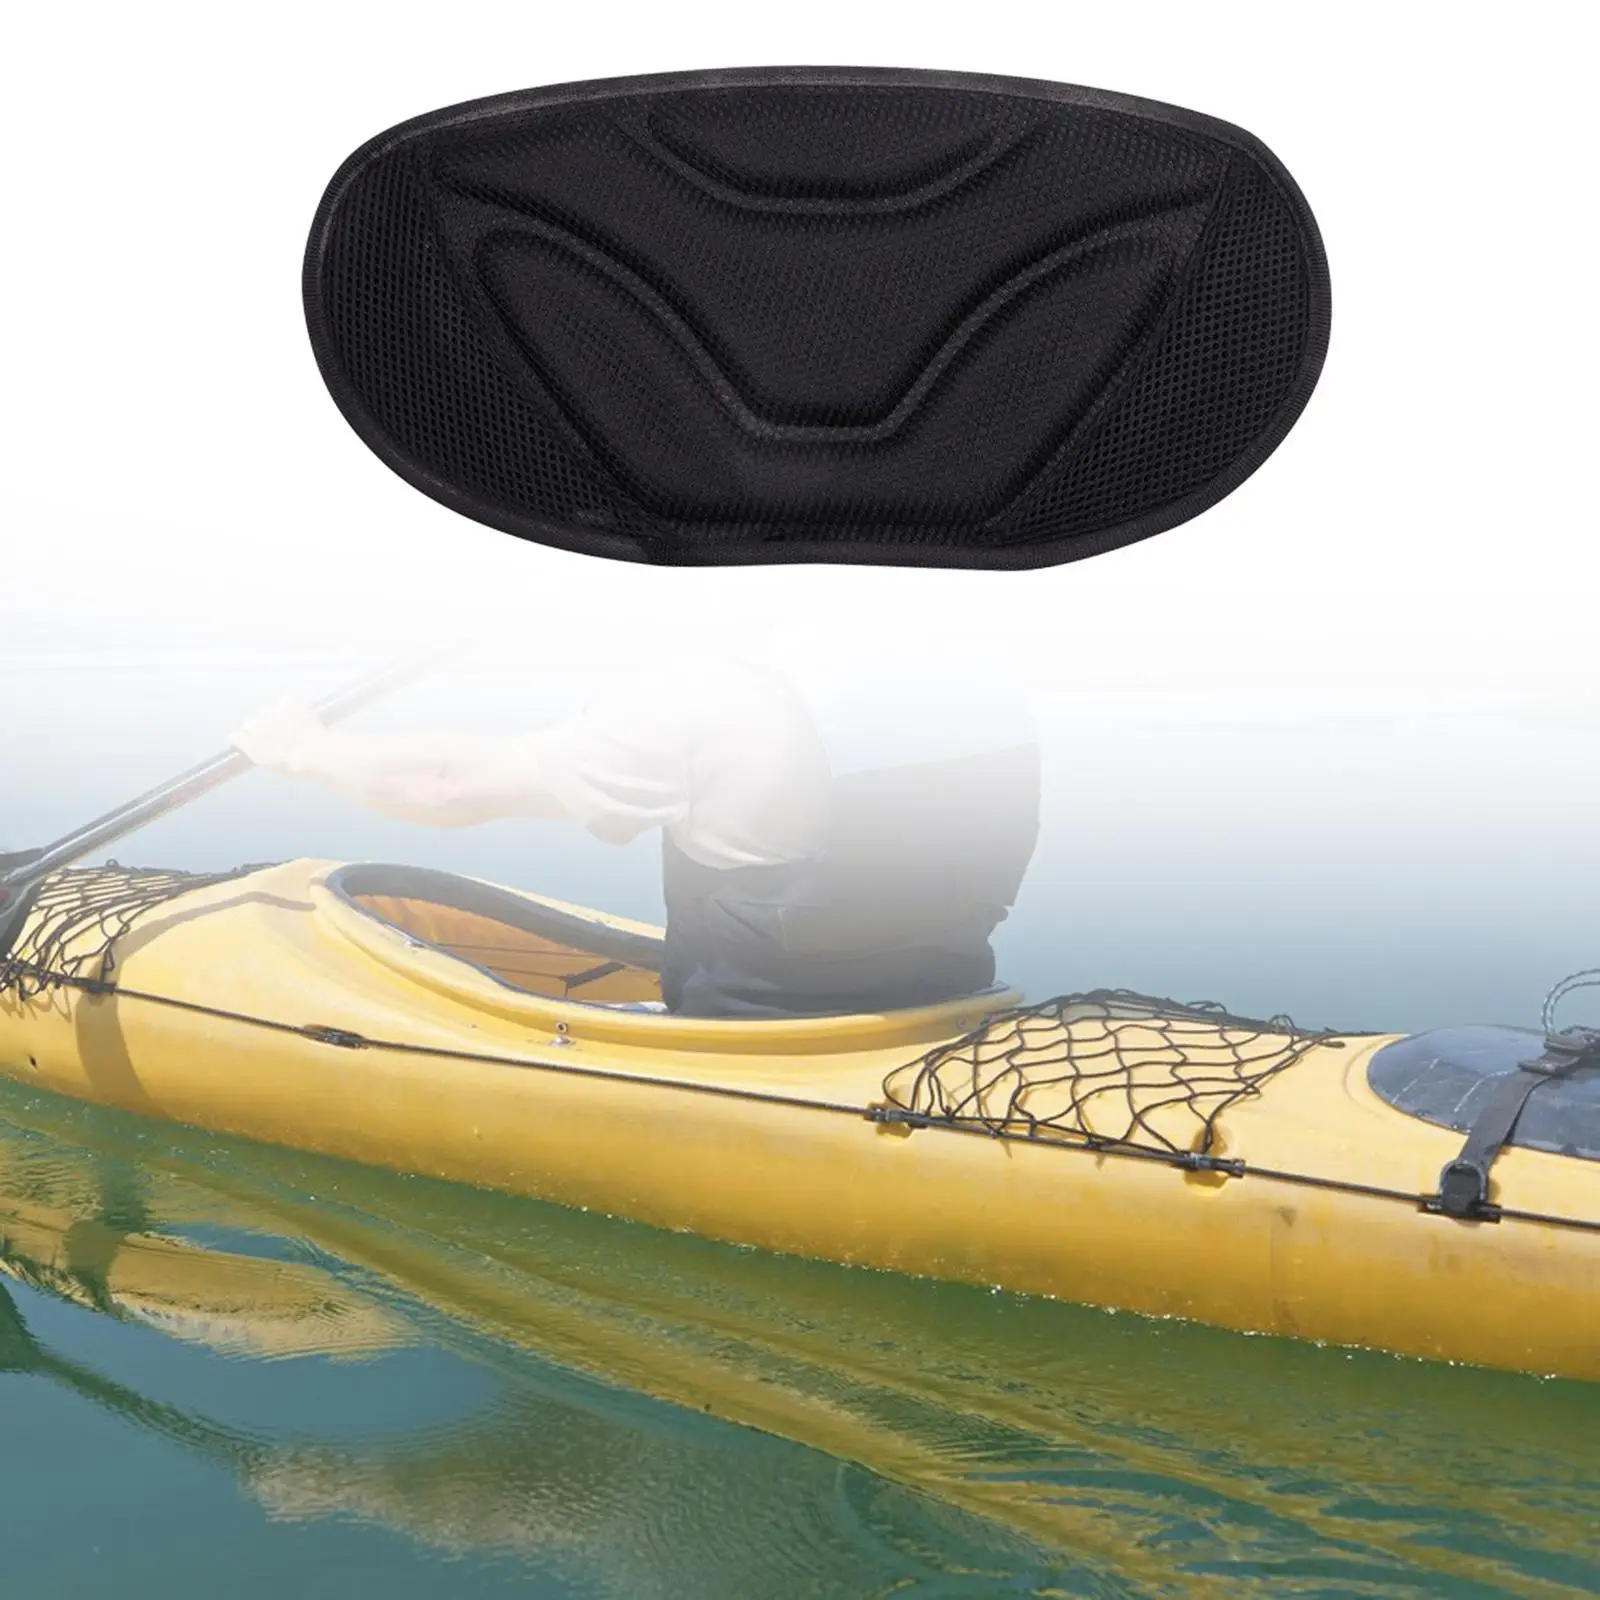 Kayak Padded Seat Soft Thicken Back Support Pad Canoe Boat Seat Boat Cushion for Canoeing Kayaking Rafting Drifting Accessories